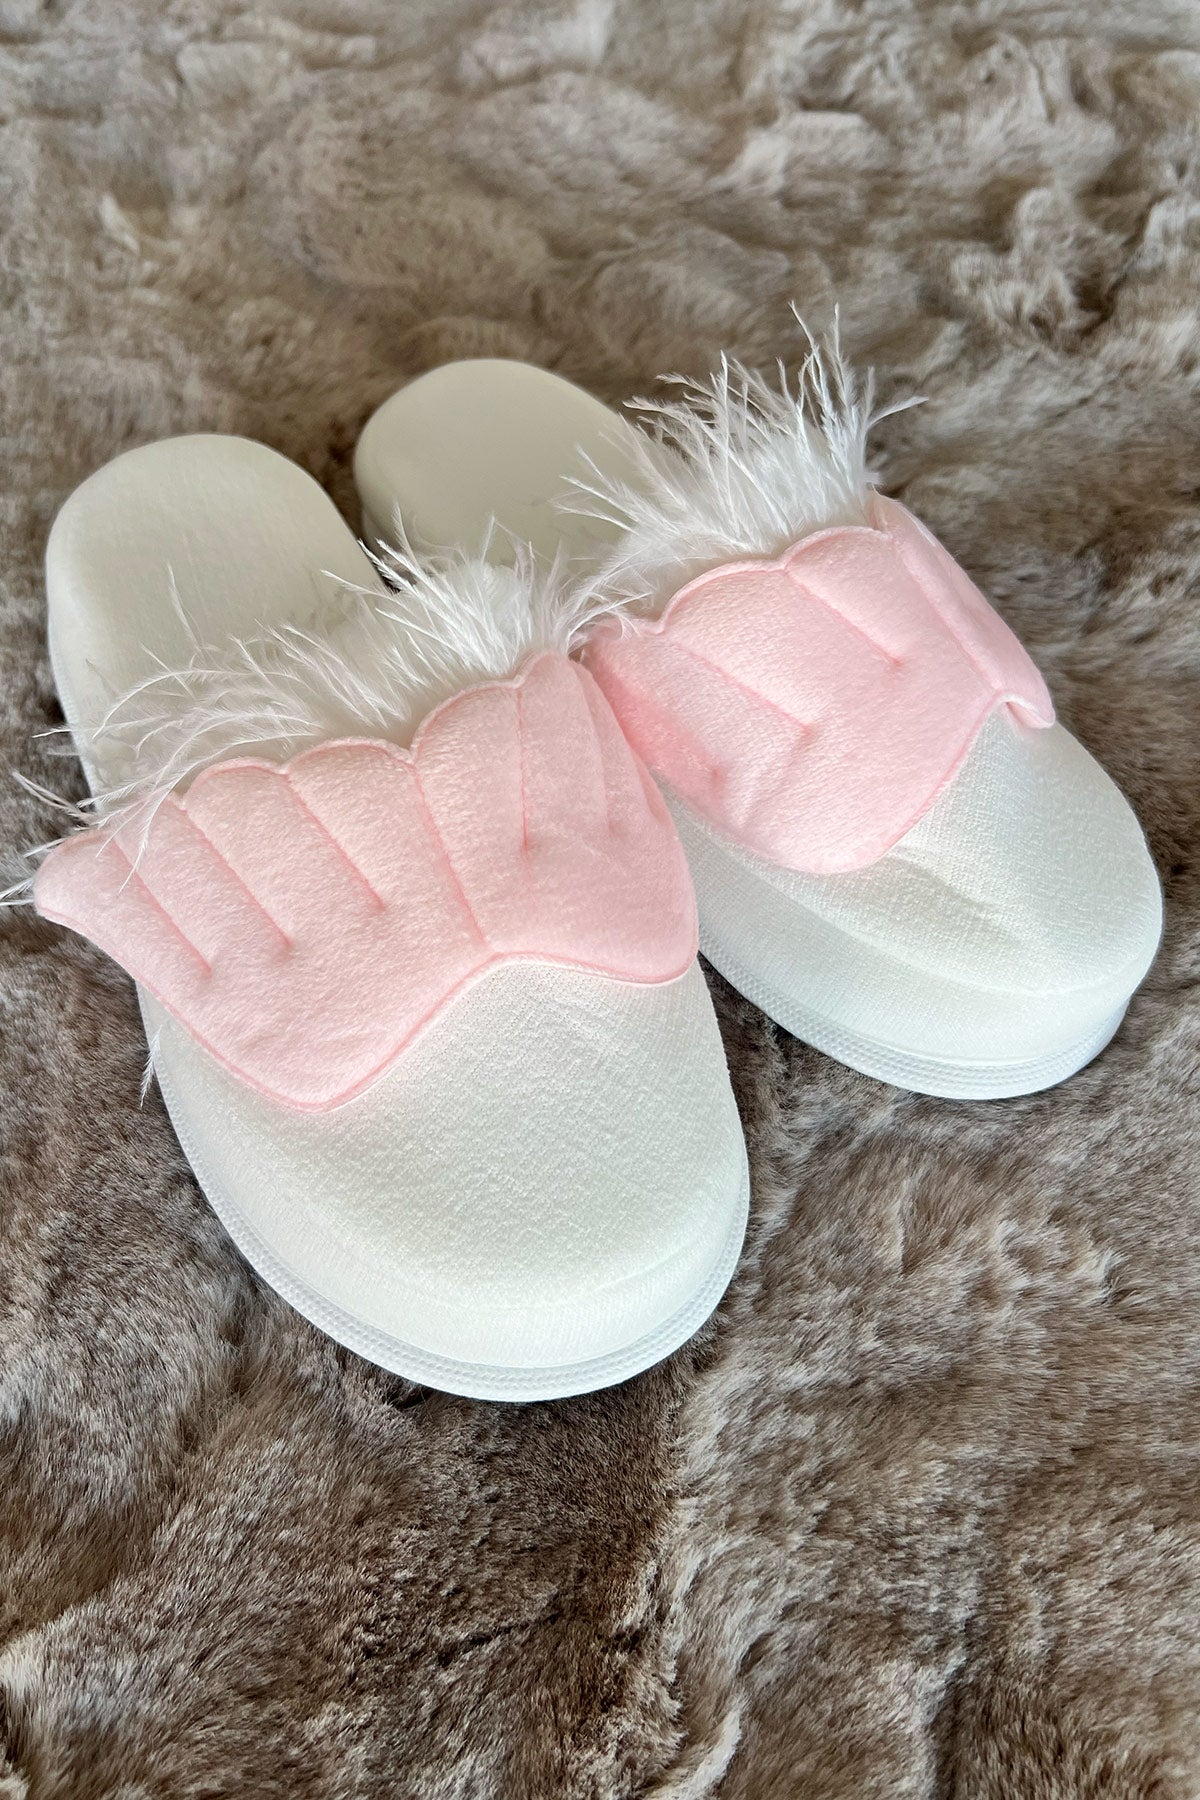 Shopymommy 75007 Angel Wing Maternity Slippers Pink